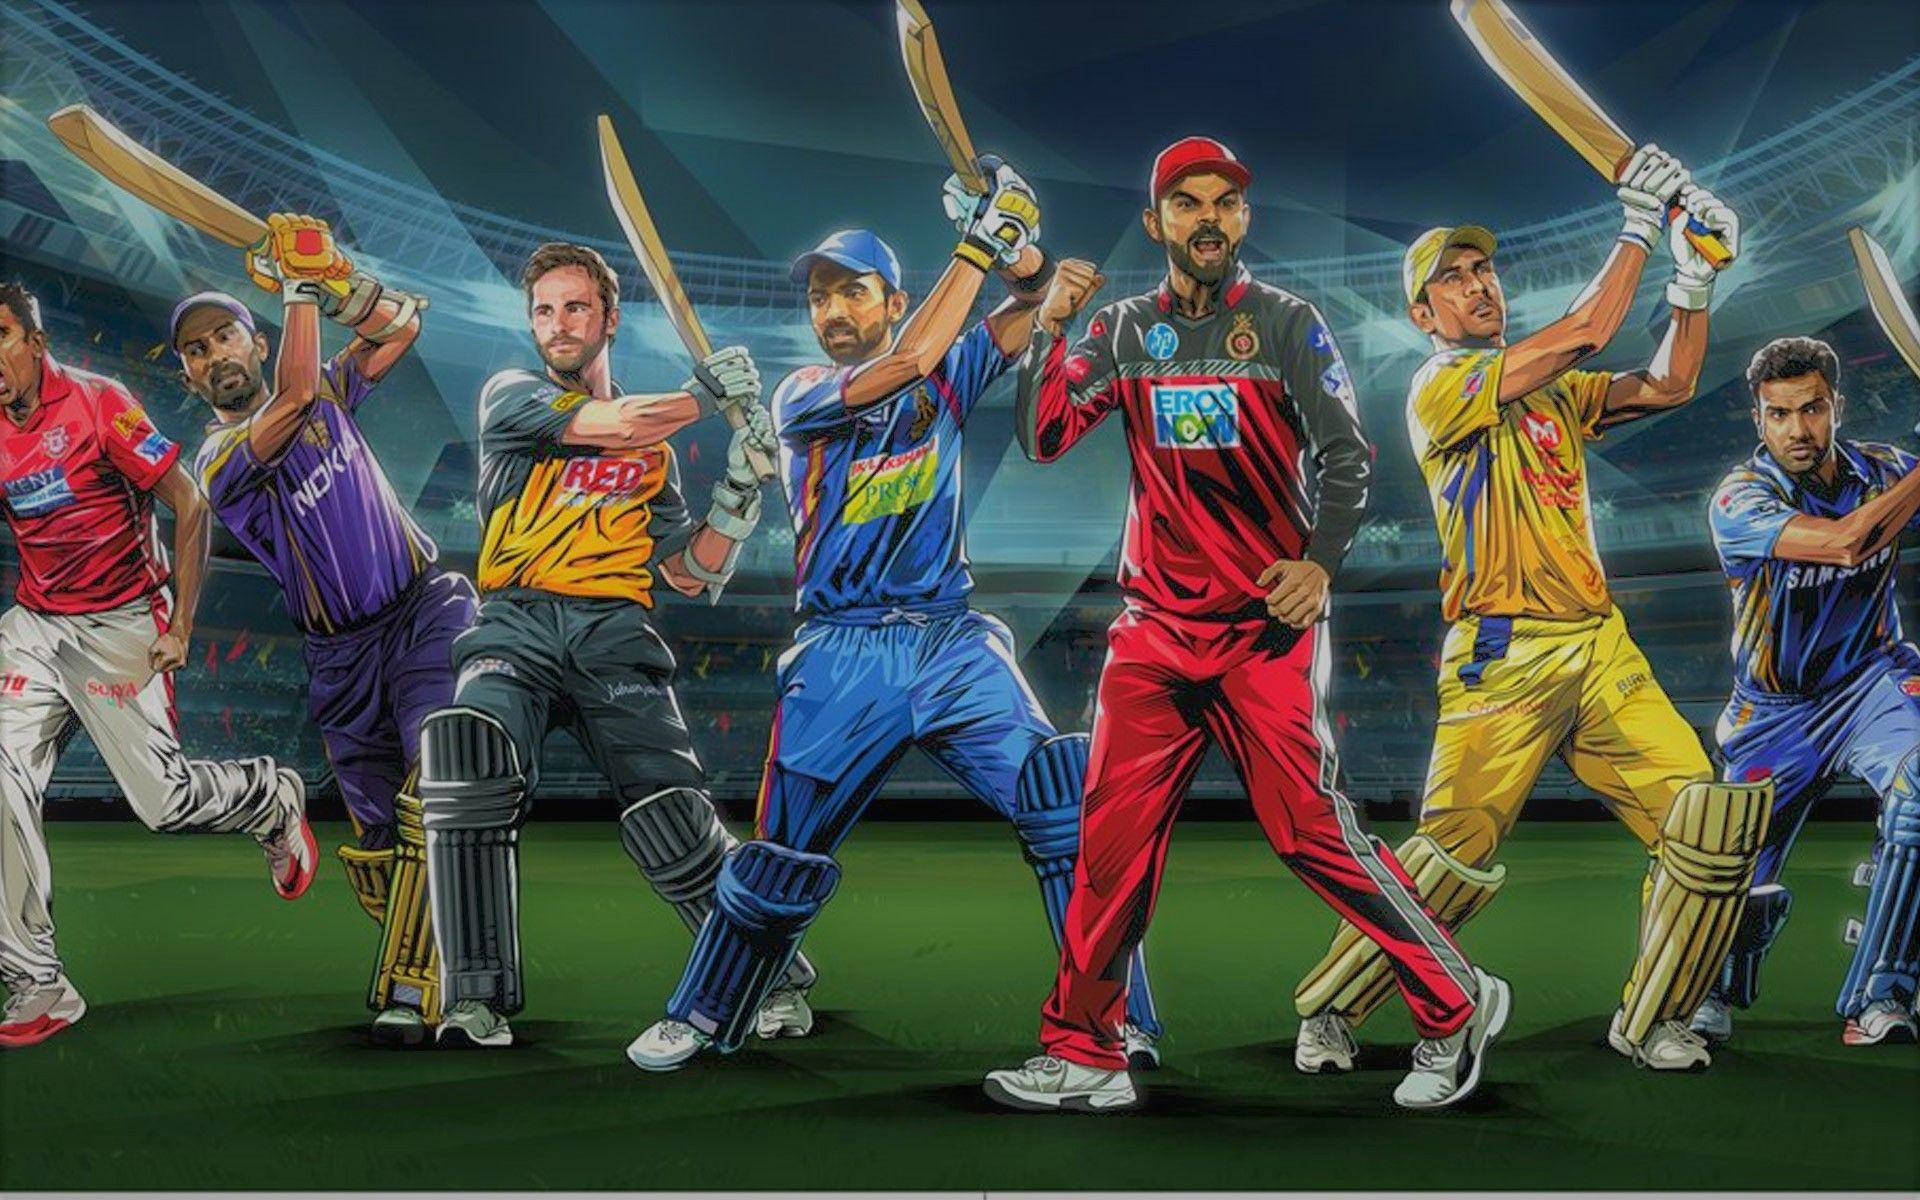 How's IPL world biggest T20 Format and very popular in world was started!